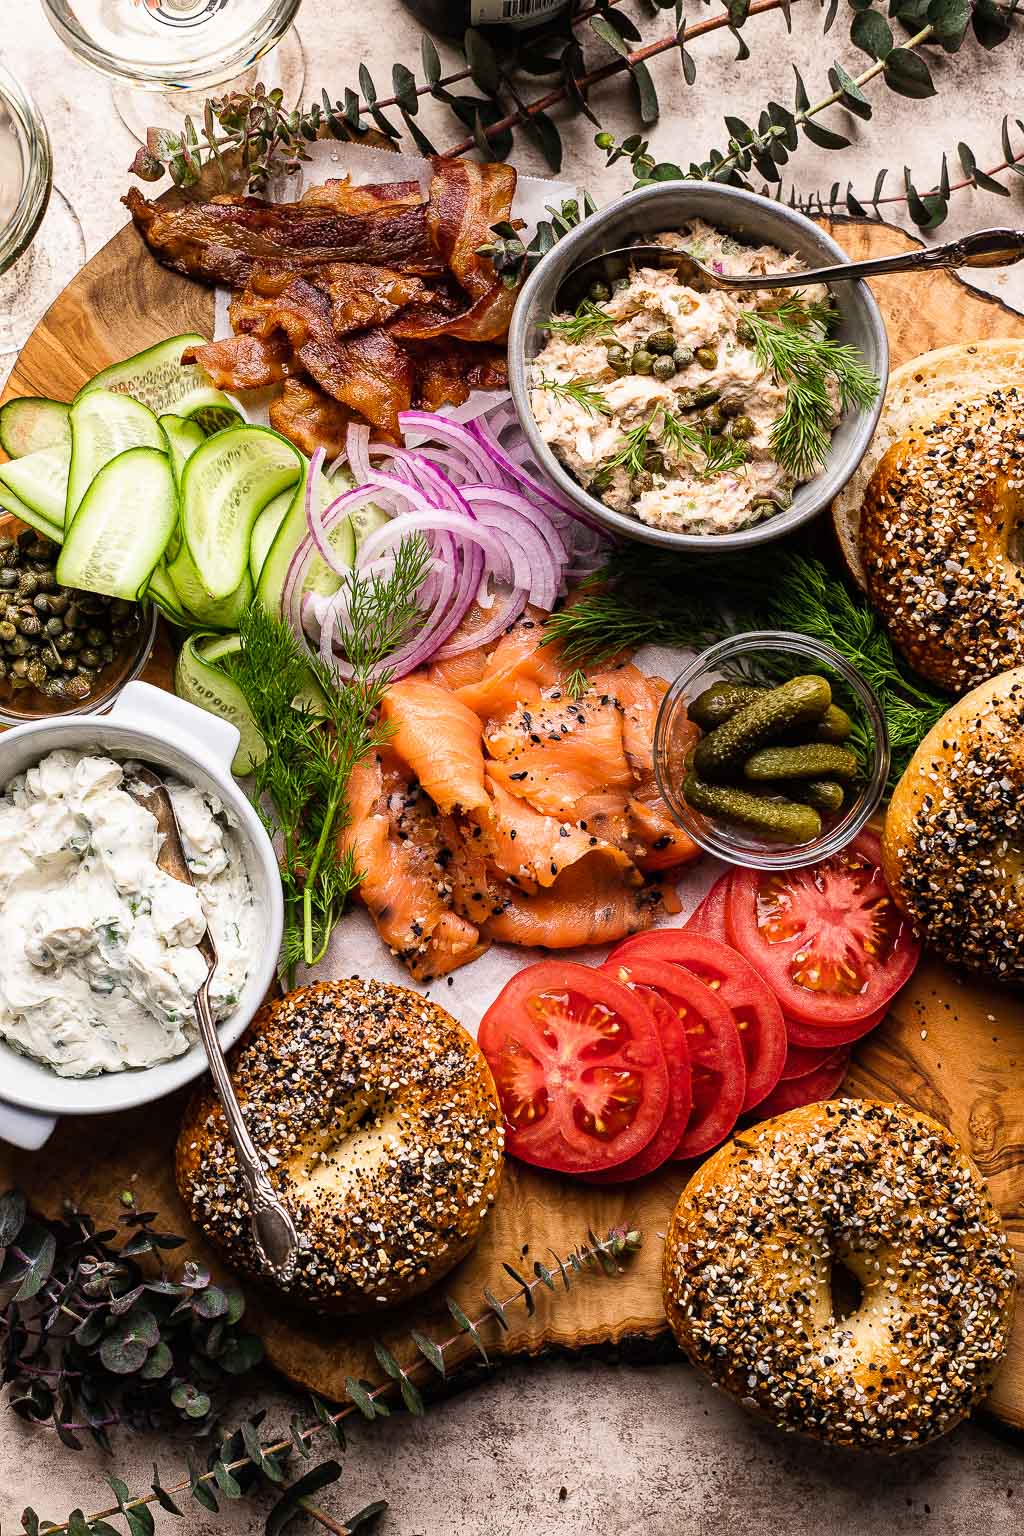 Bagel and Lox Board